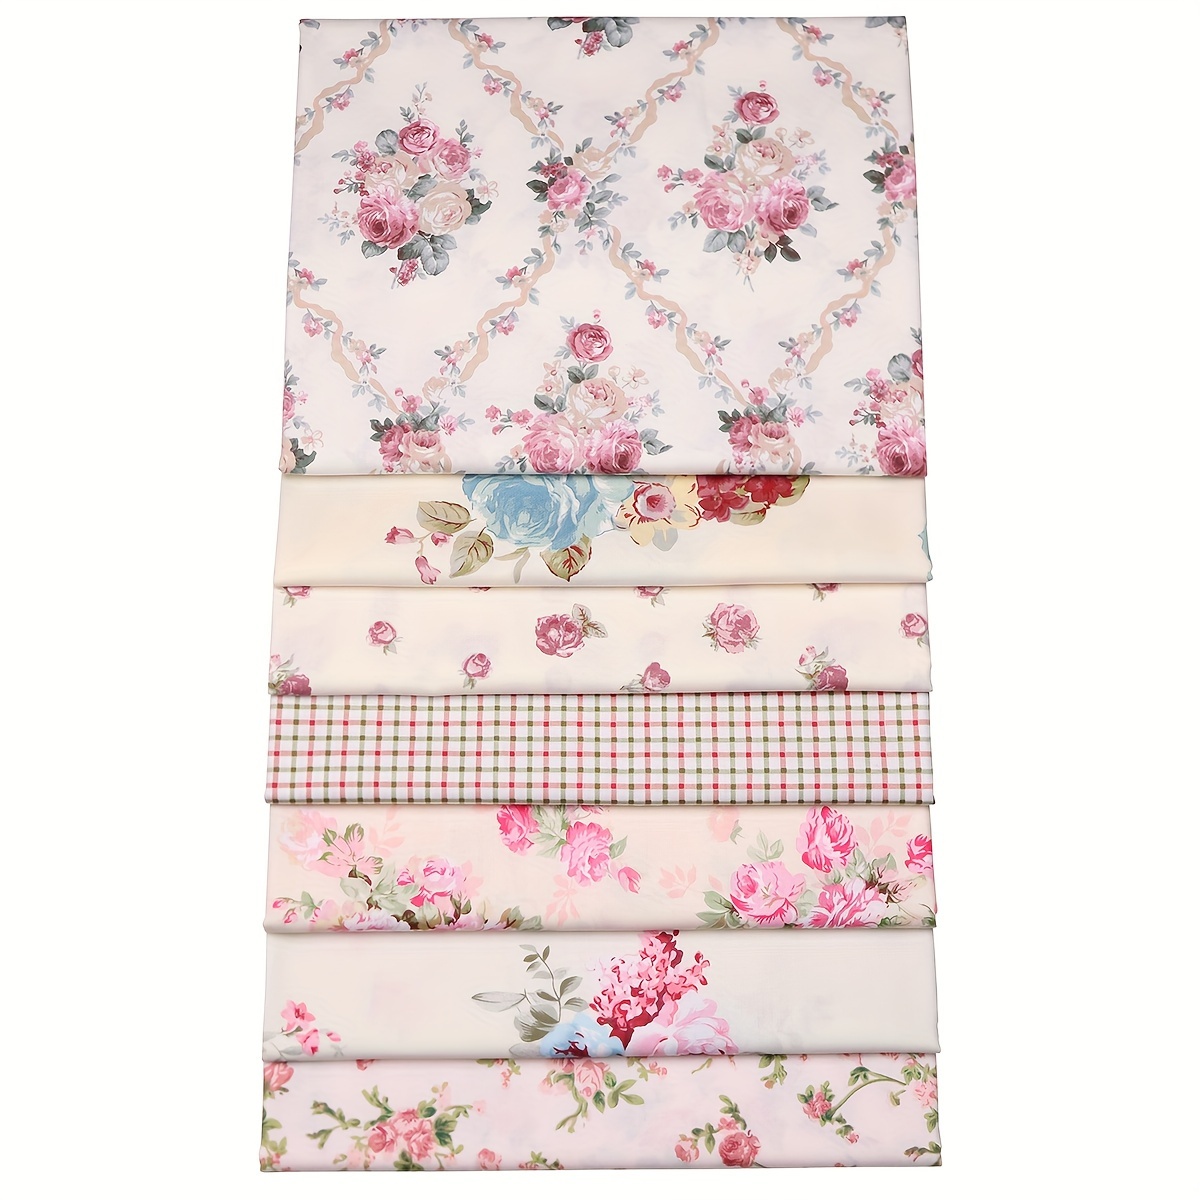 

Hanjunzhao 7-piece Vintage Floral Cotton Fabric Bundle - Perfect For Diy Crafts, Handmade Bows, Clothing & Doll Apparel, Quilting , 15.75 X 19.69 Inches